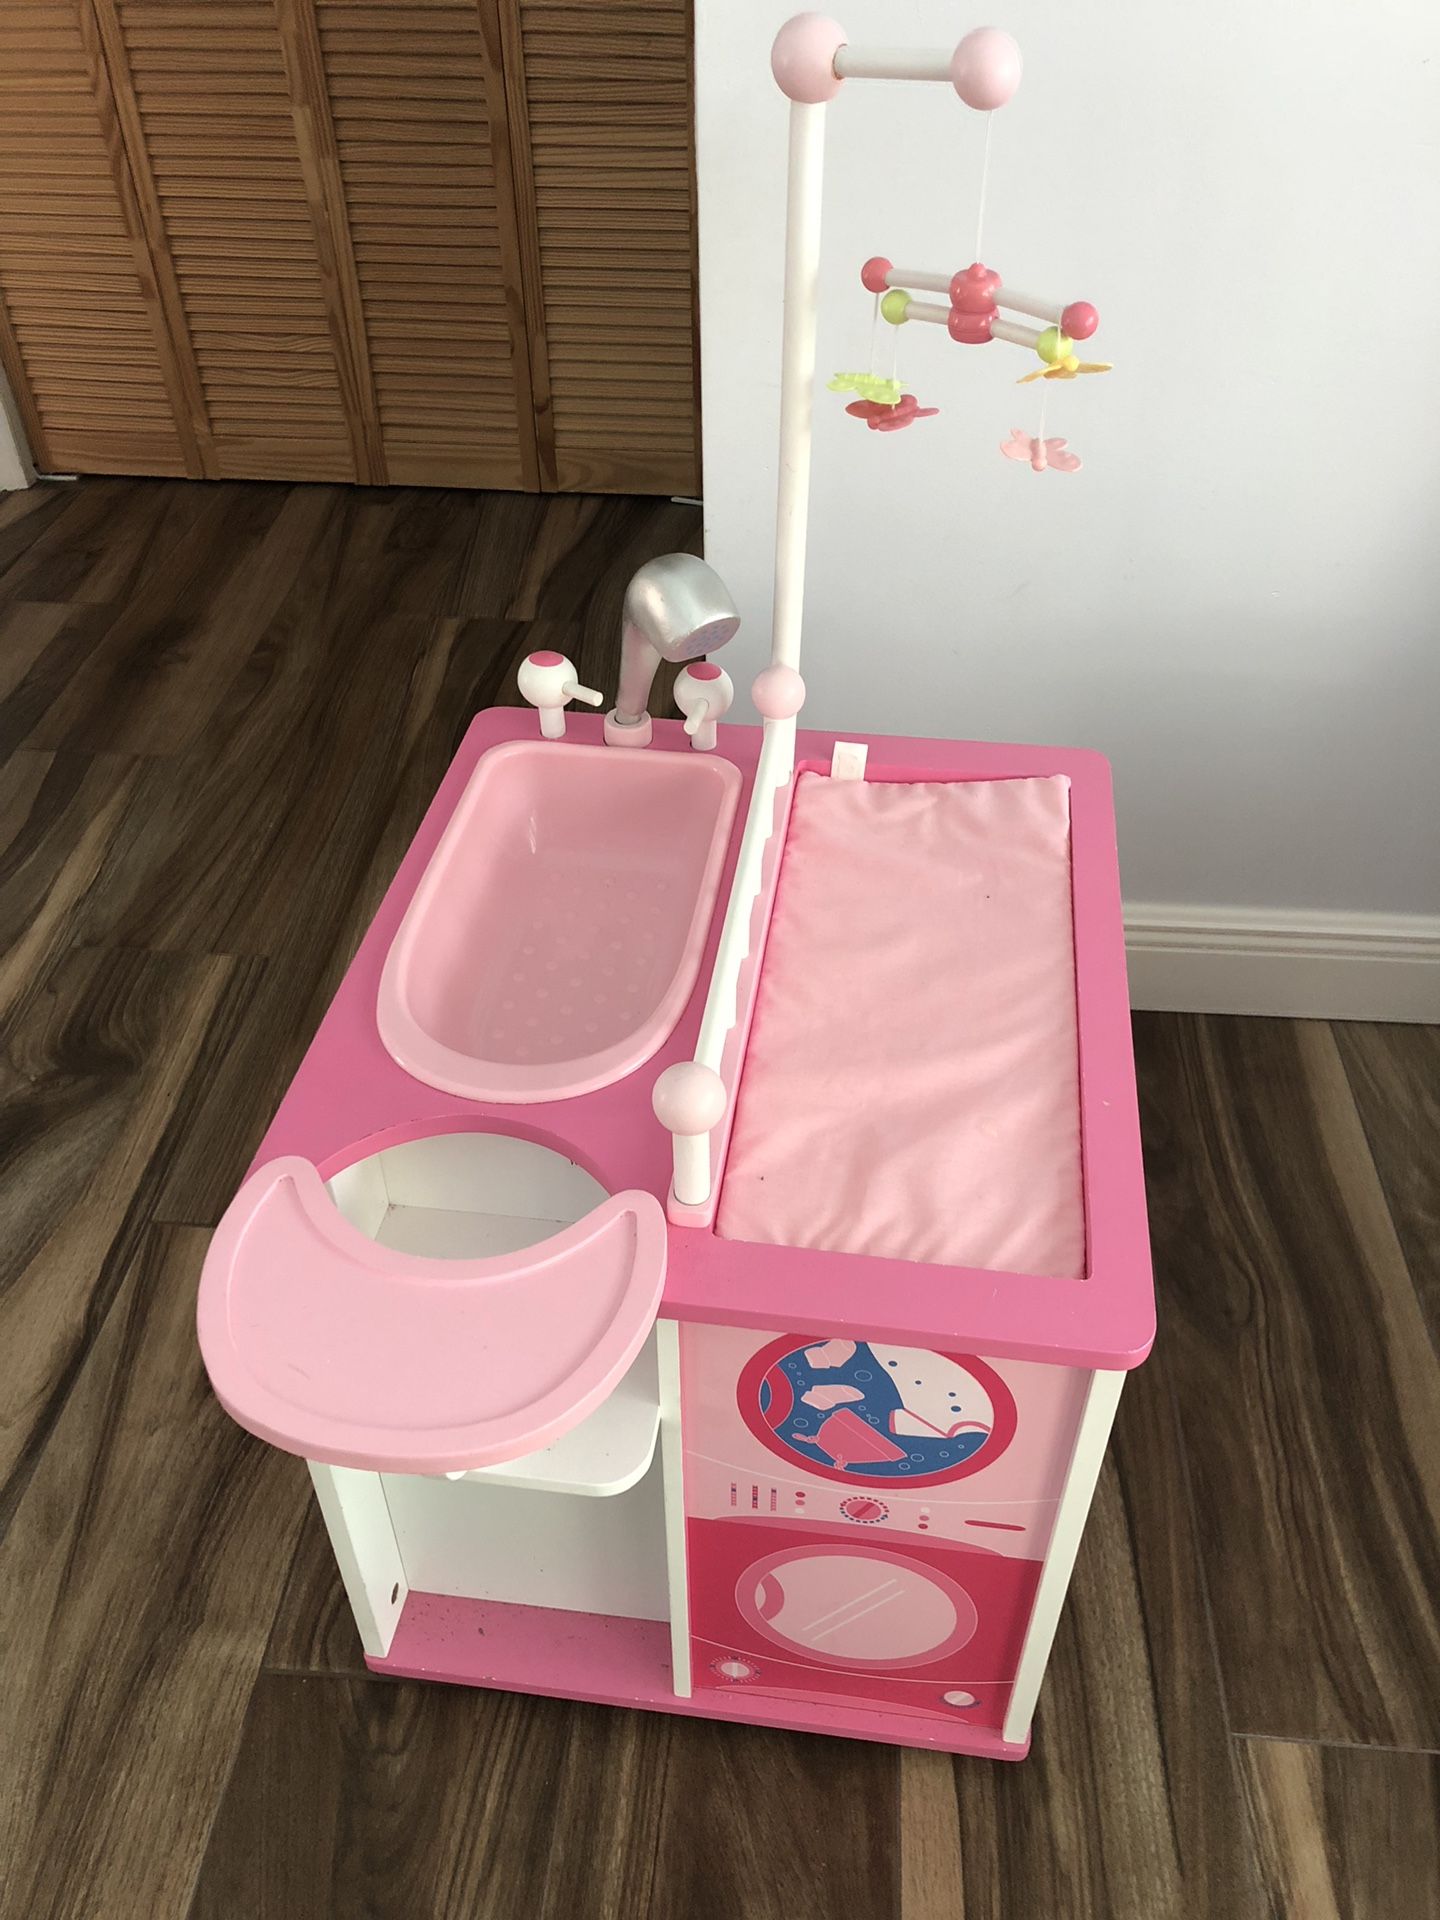 Babydoll changing table, high chair, bath and storage.